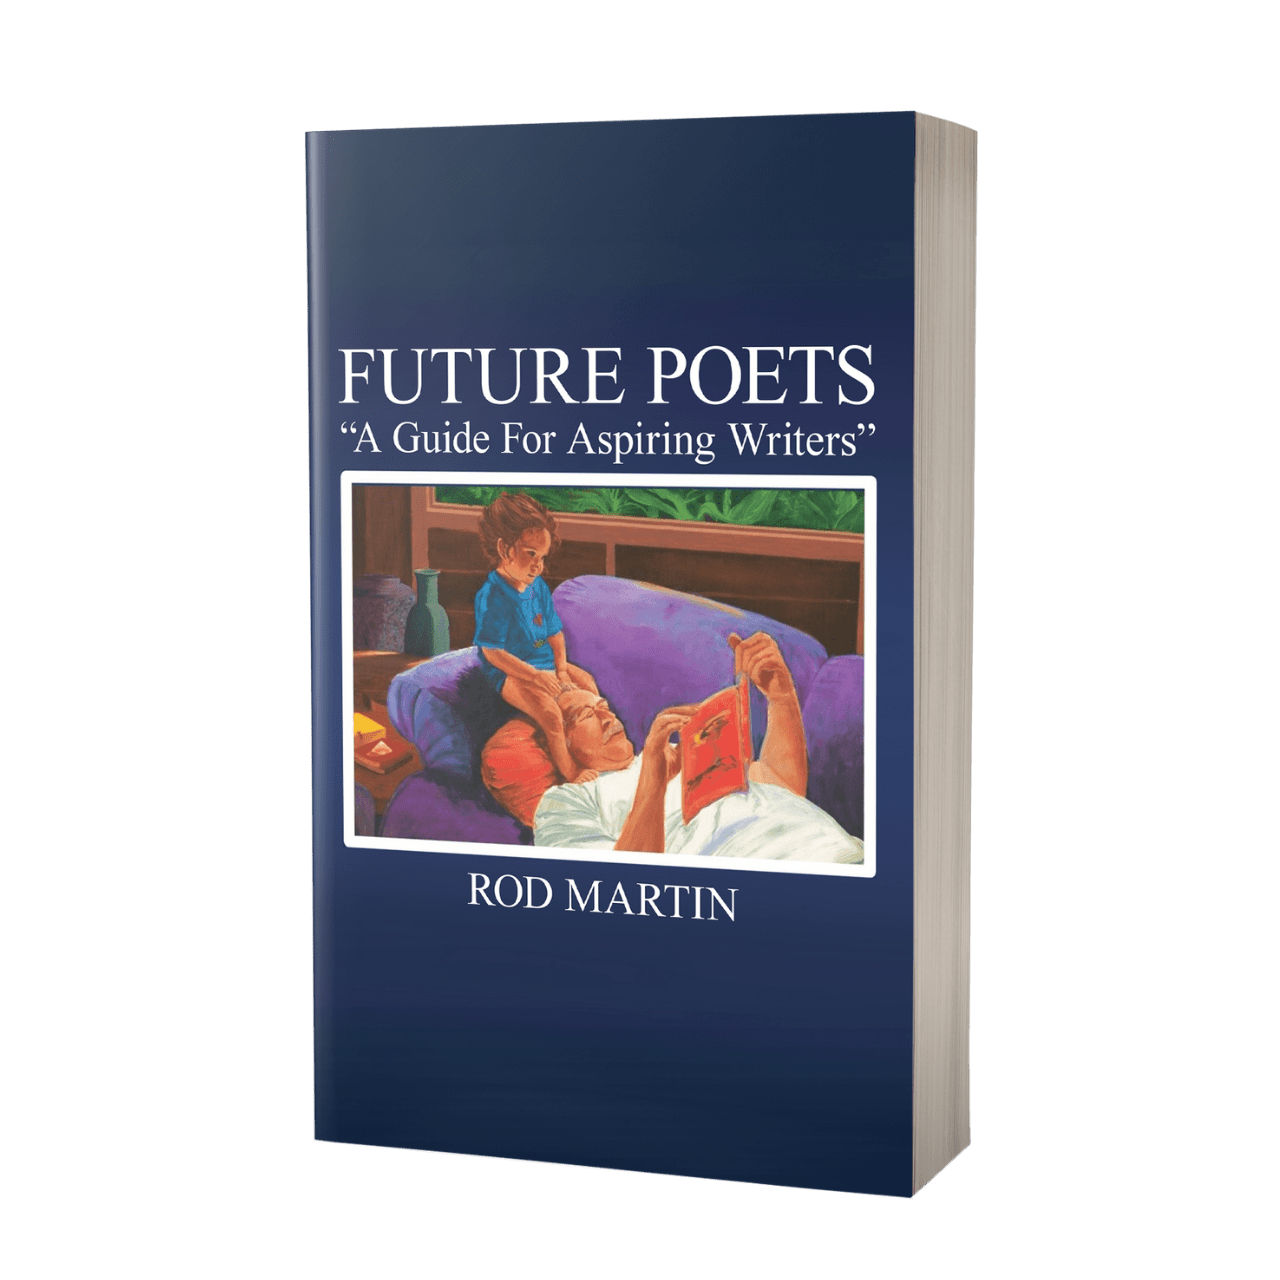 Future Poets: A Guide For Aspiring Writers